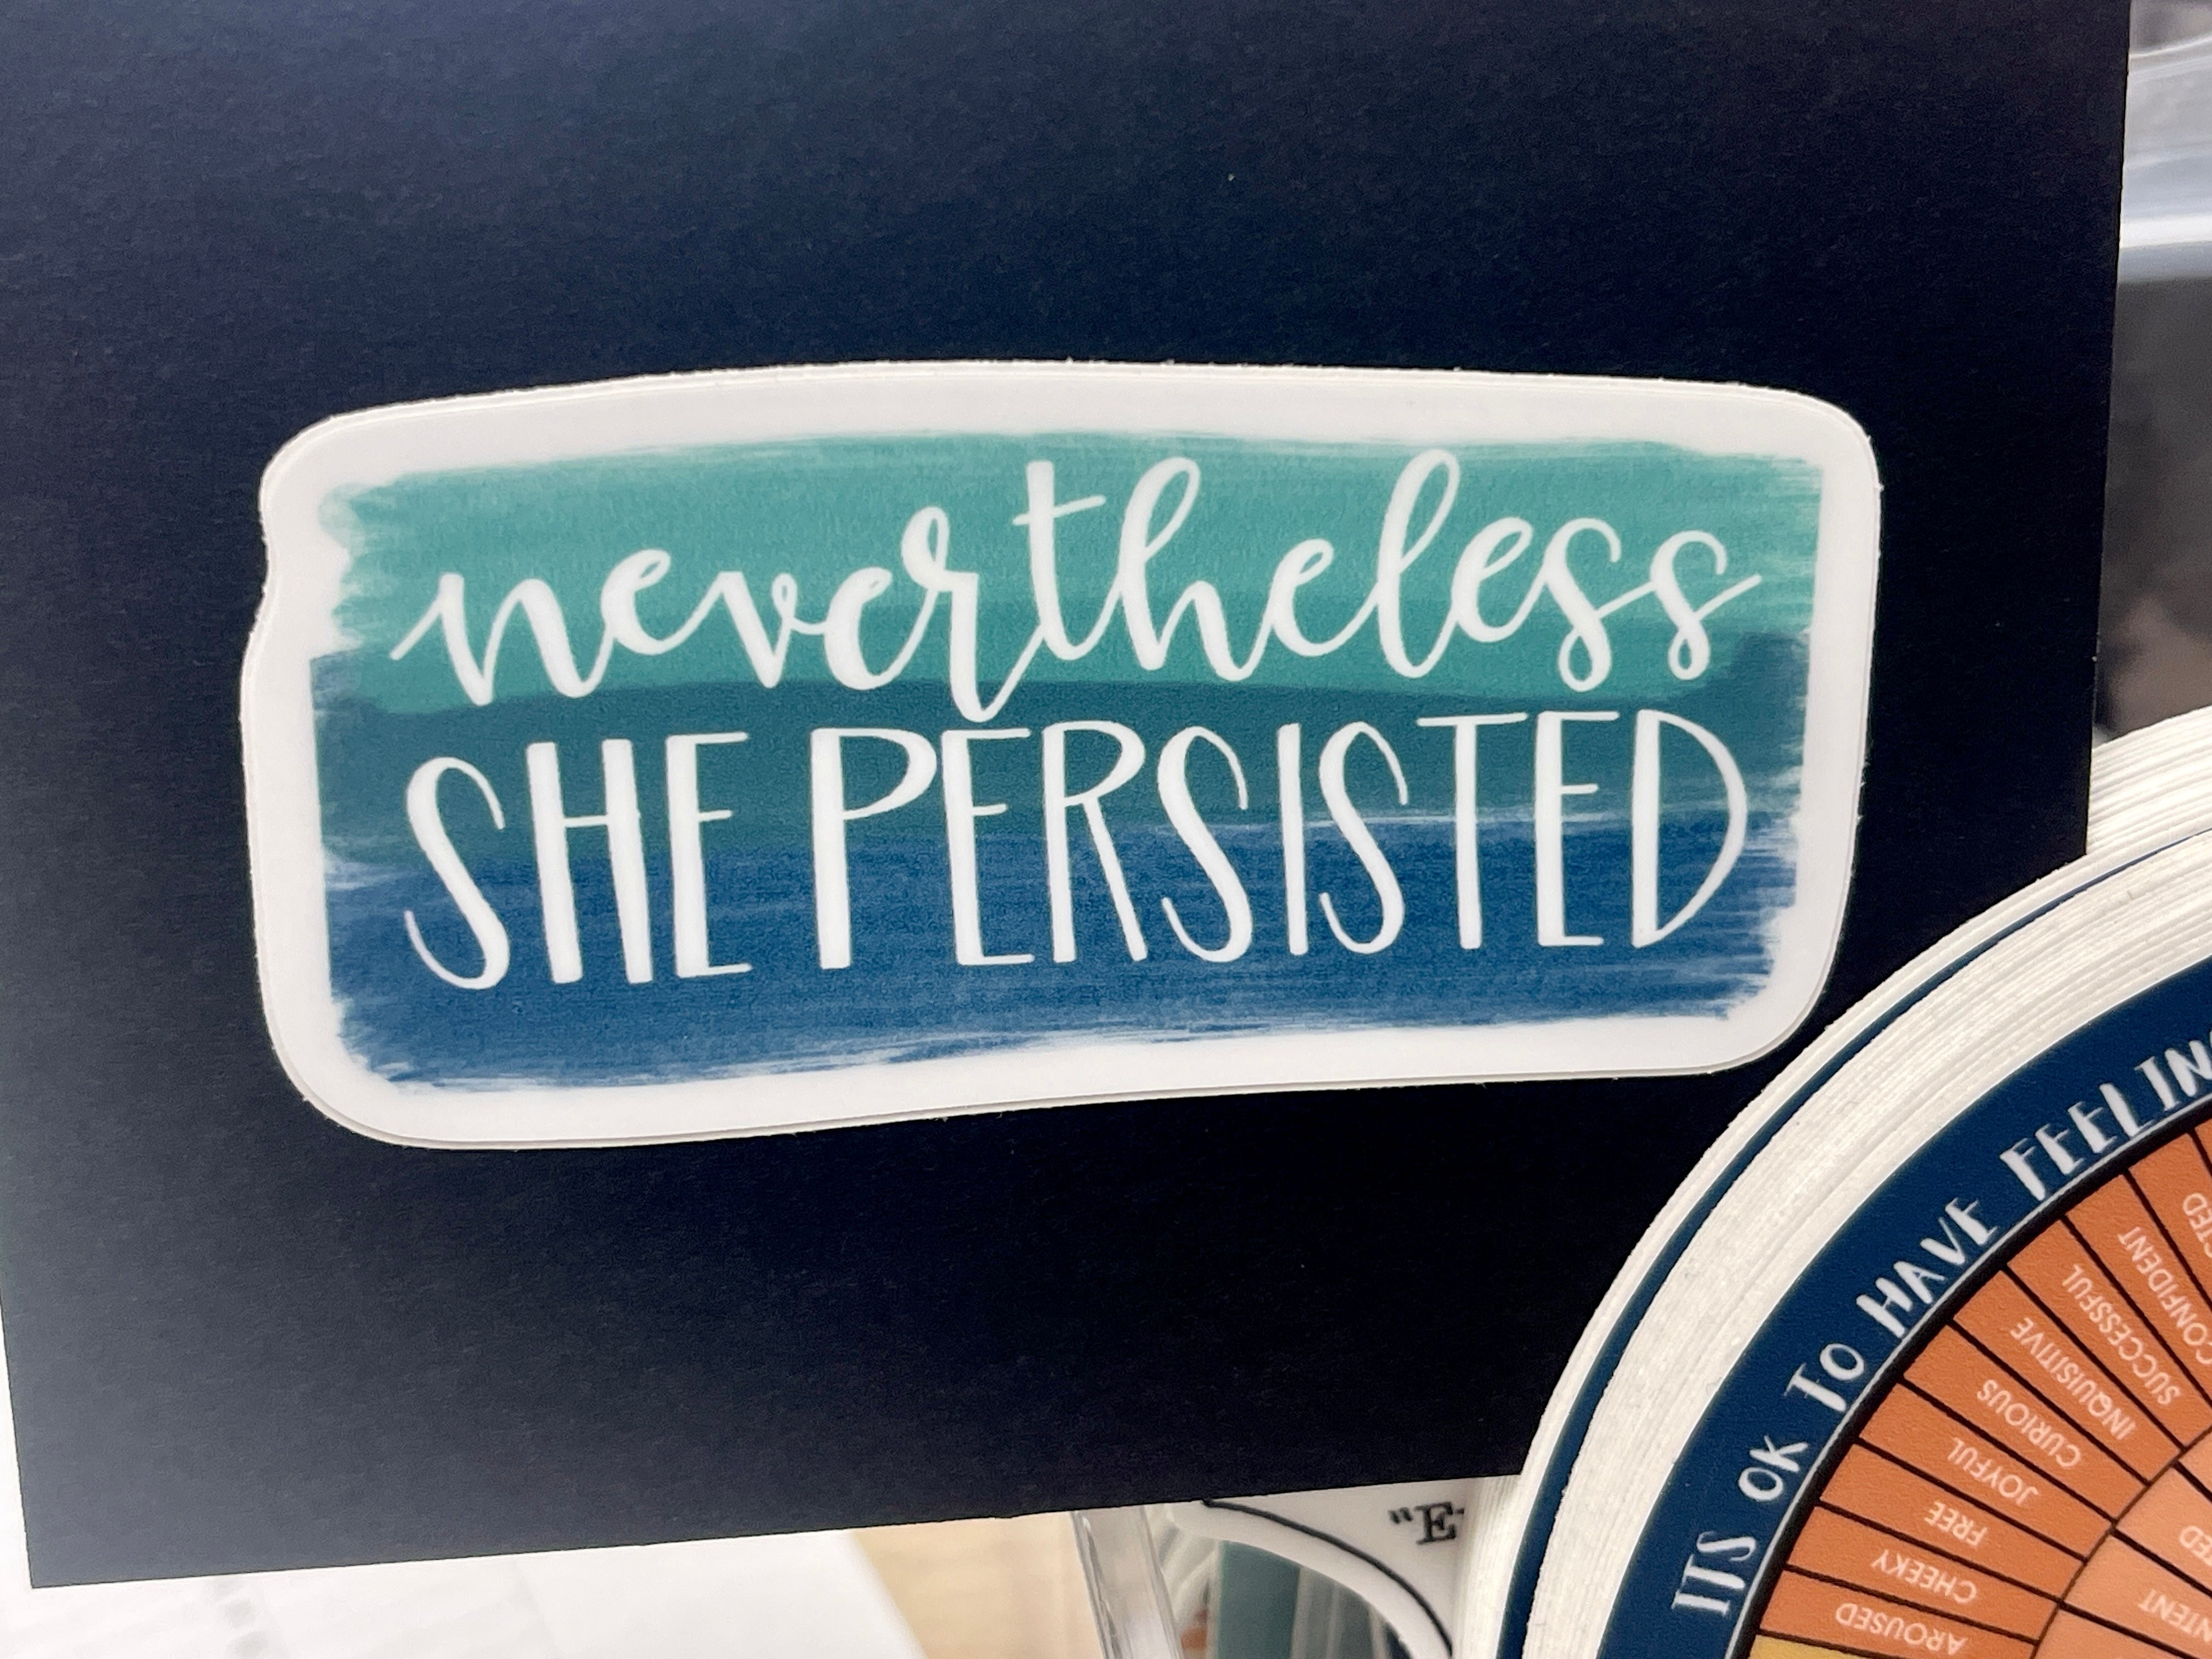 Nevertheless she persisted